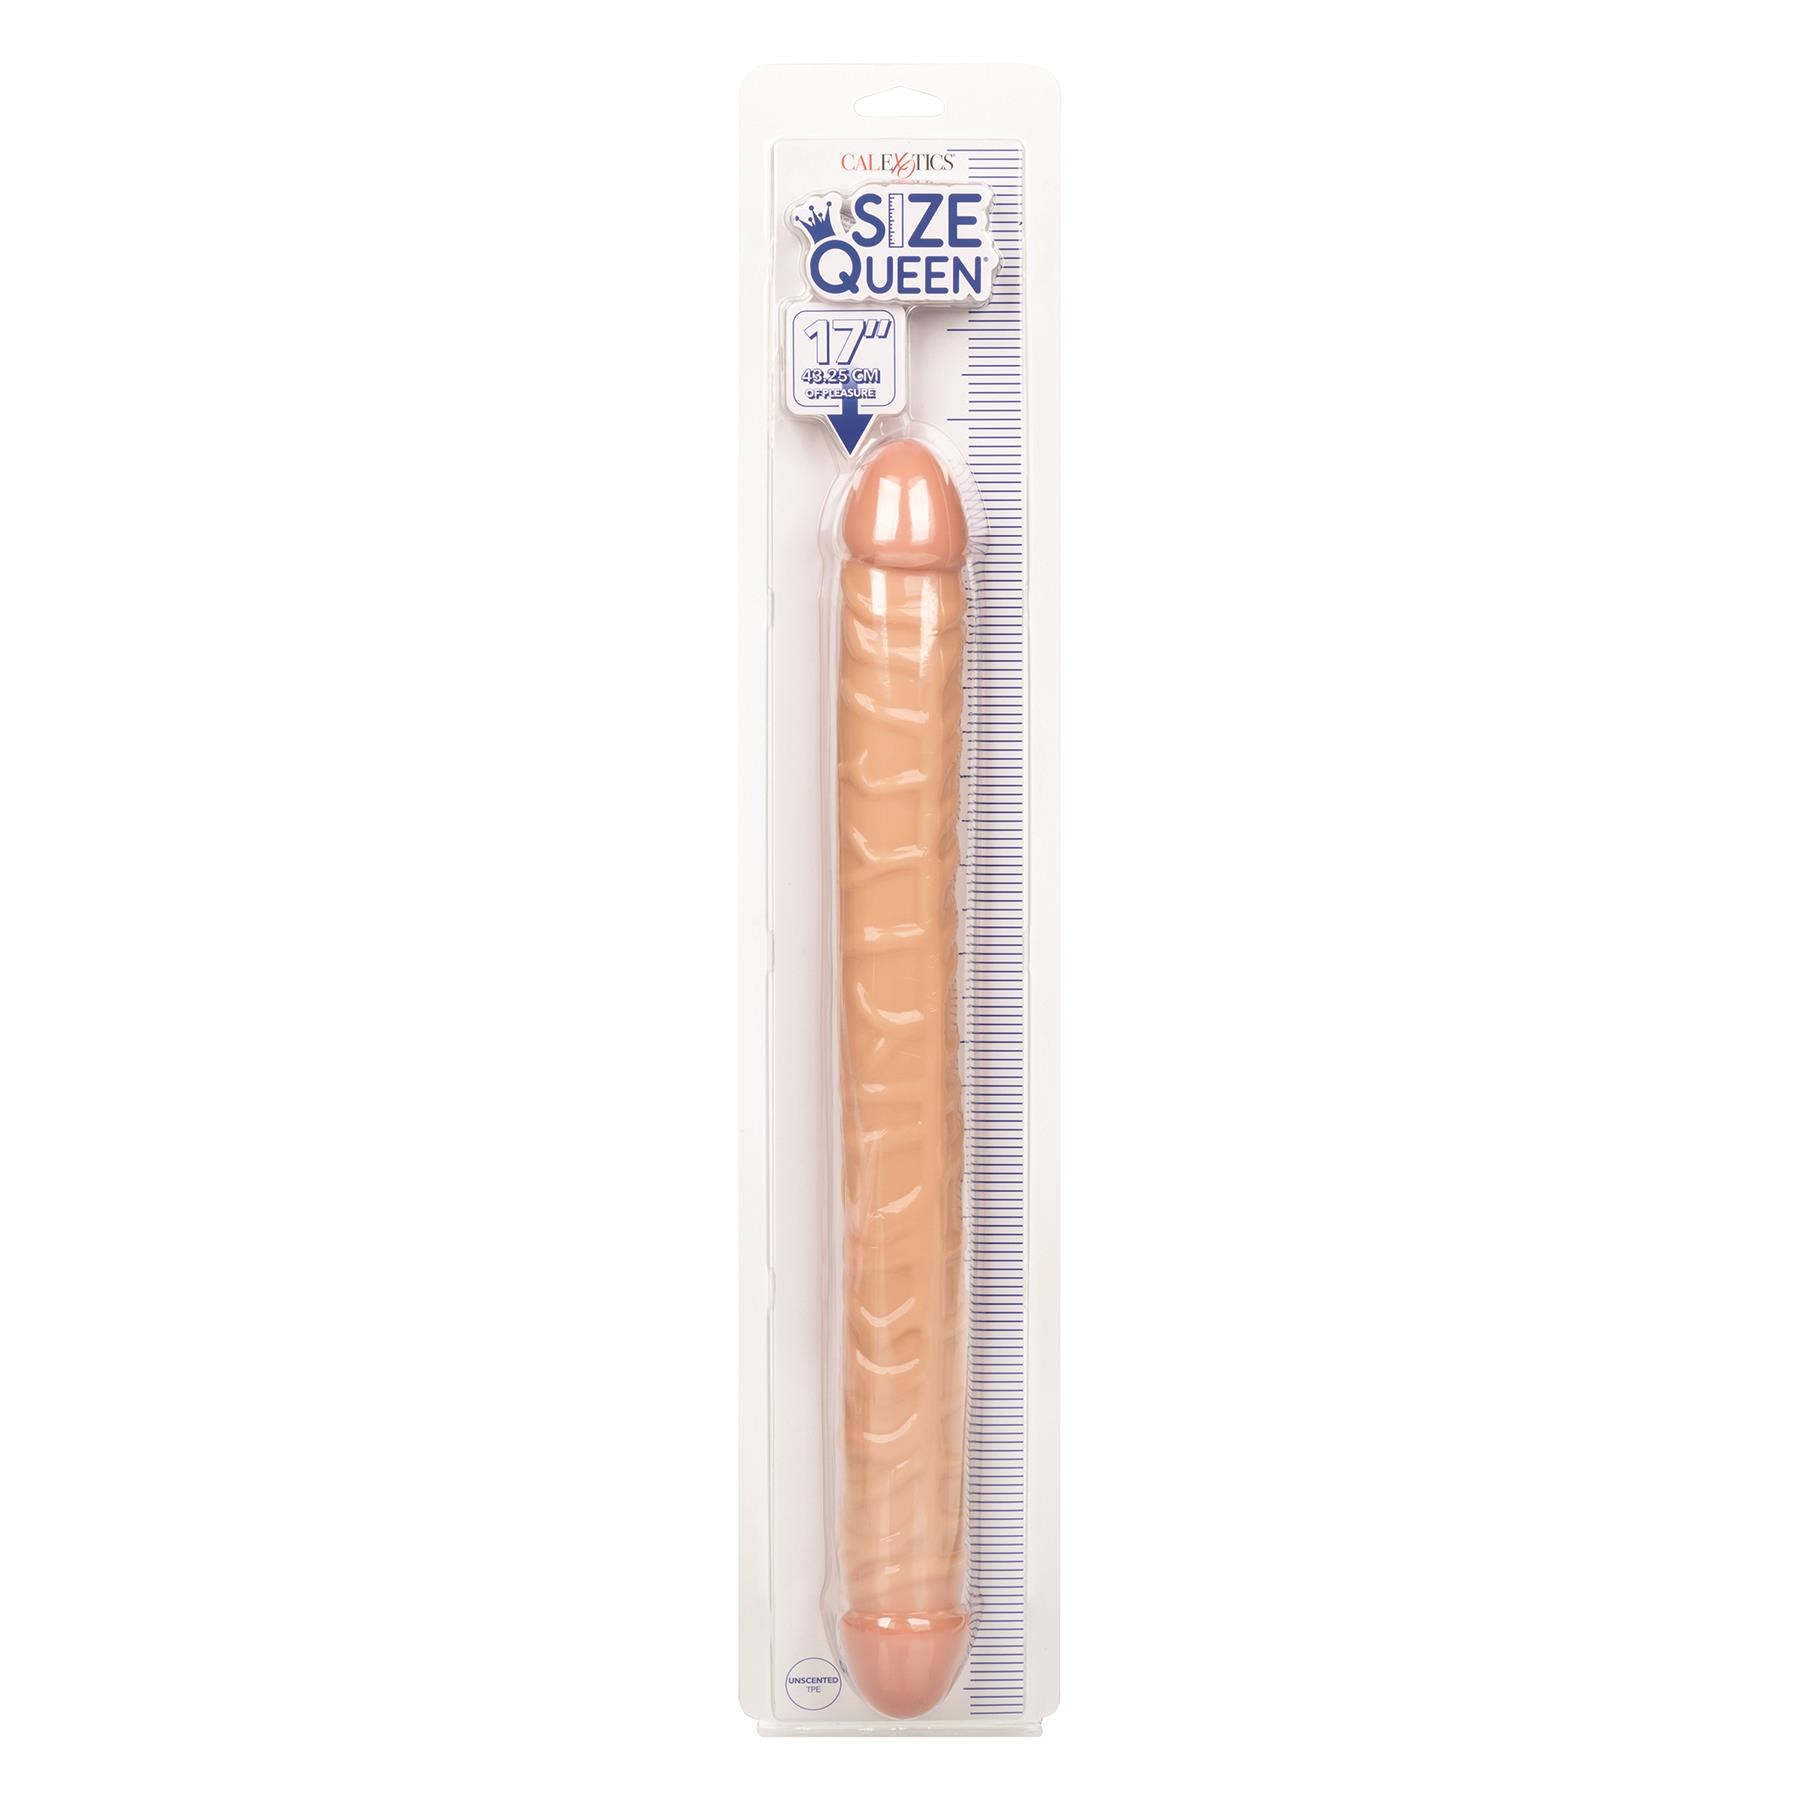 Size Queen 17 Inch Double Dong - Packaging Shot - White